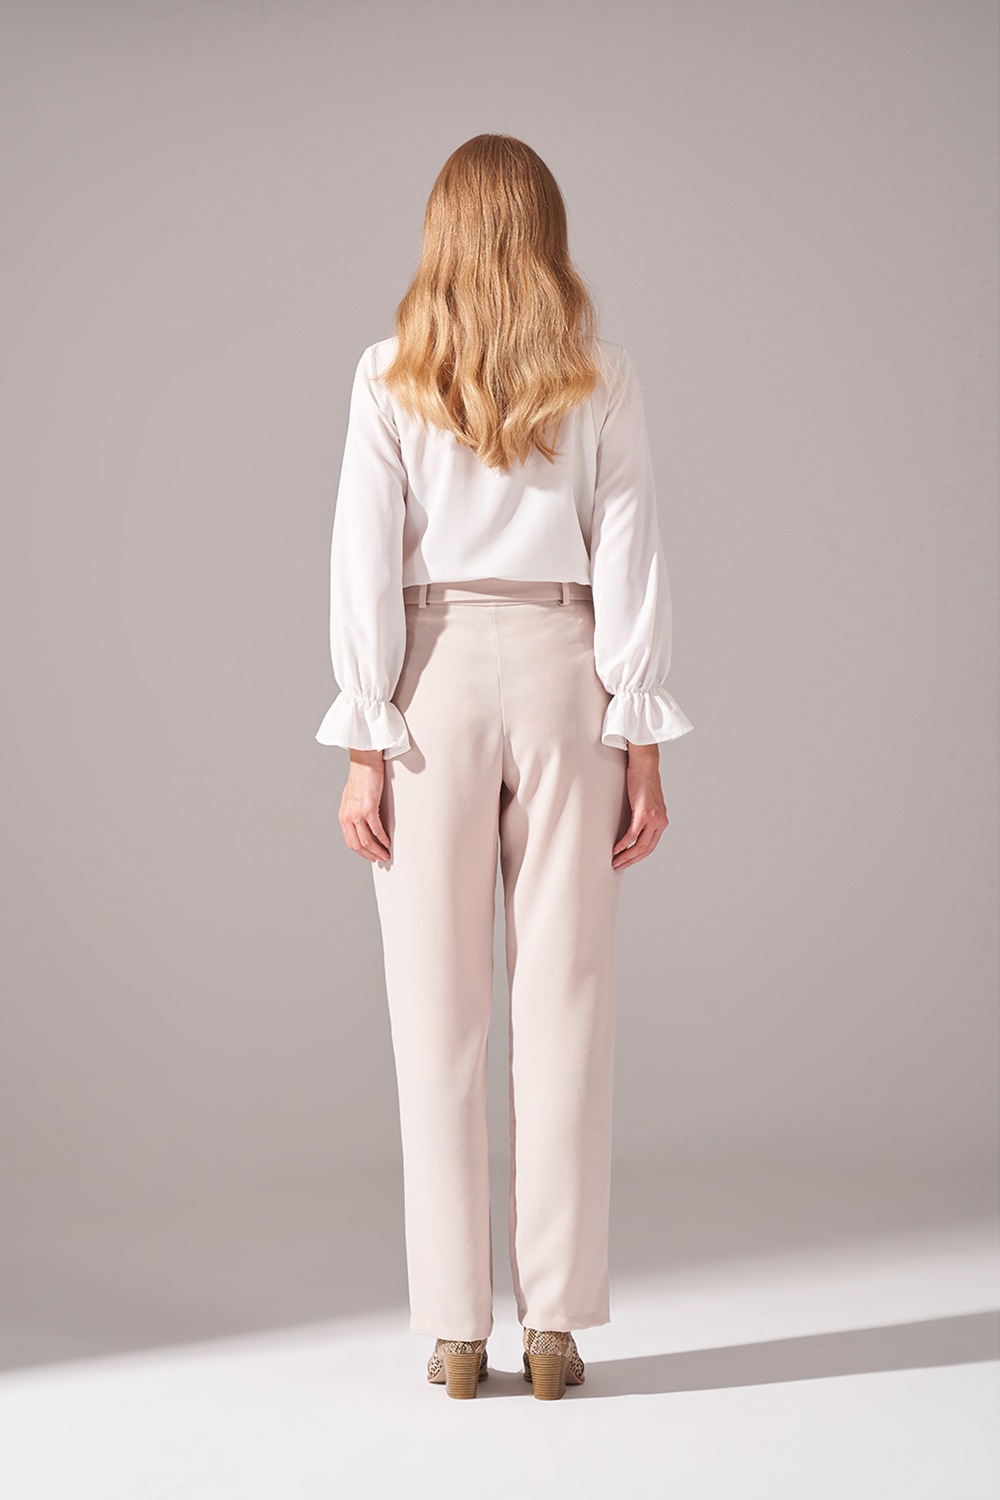 Lace-Up Crepe Trousers (Beige)